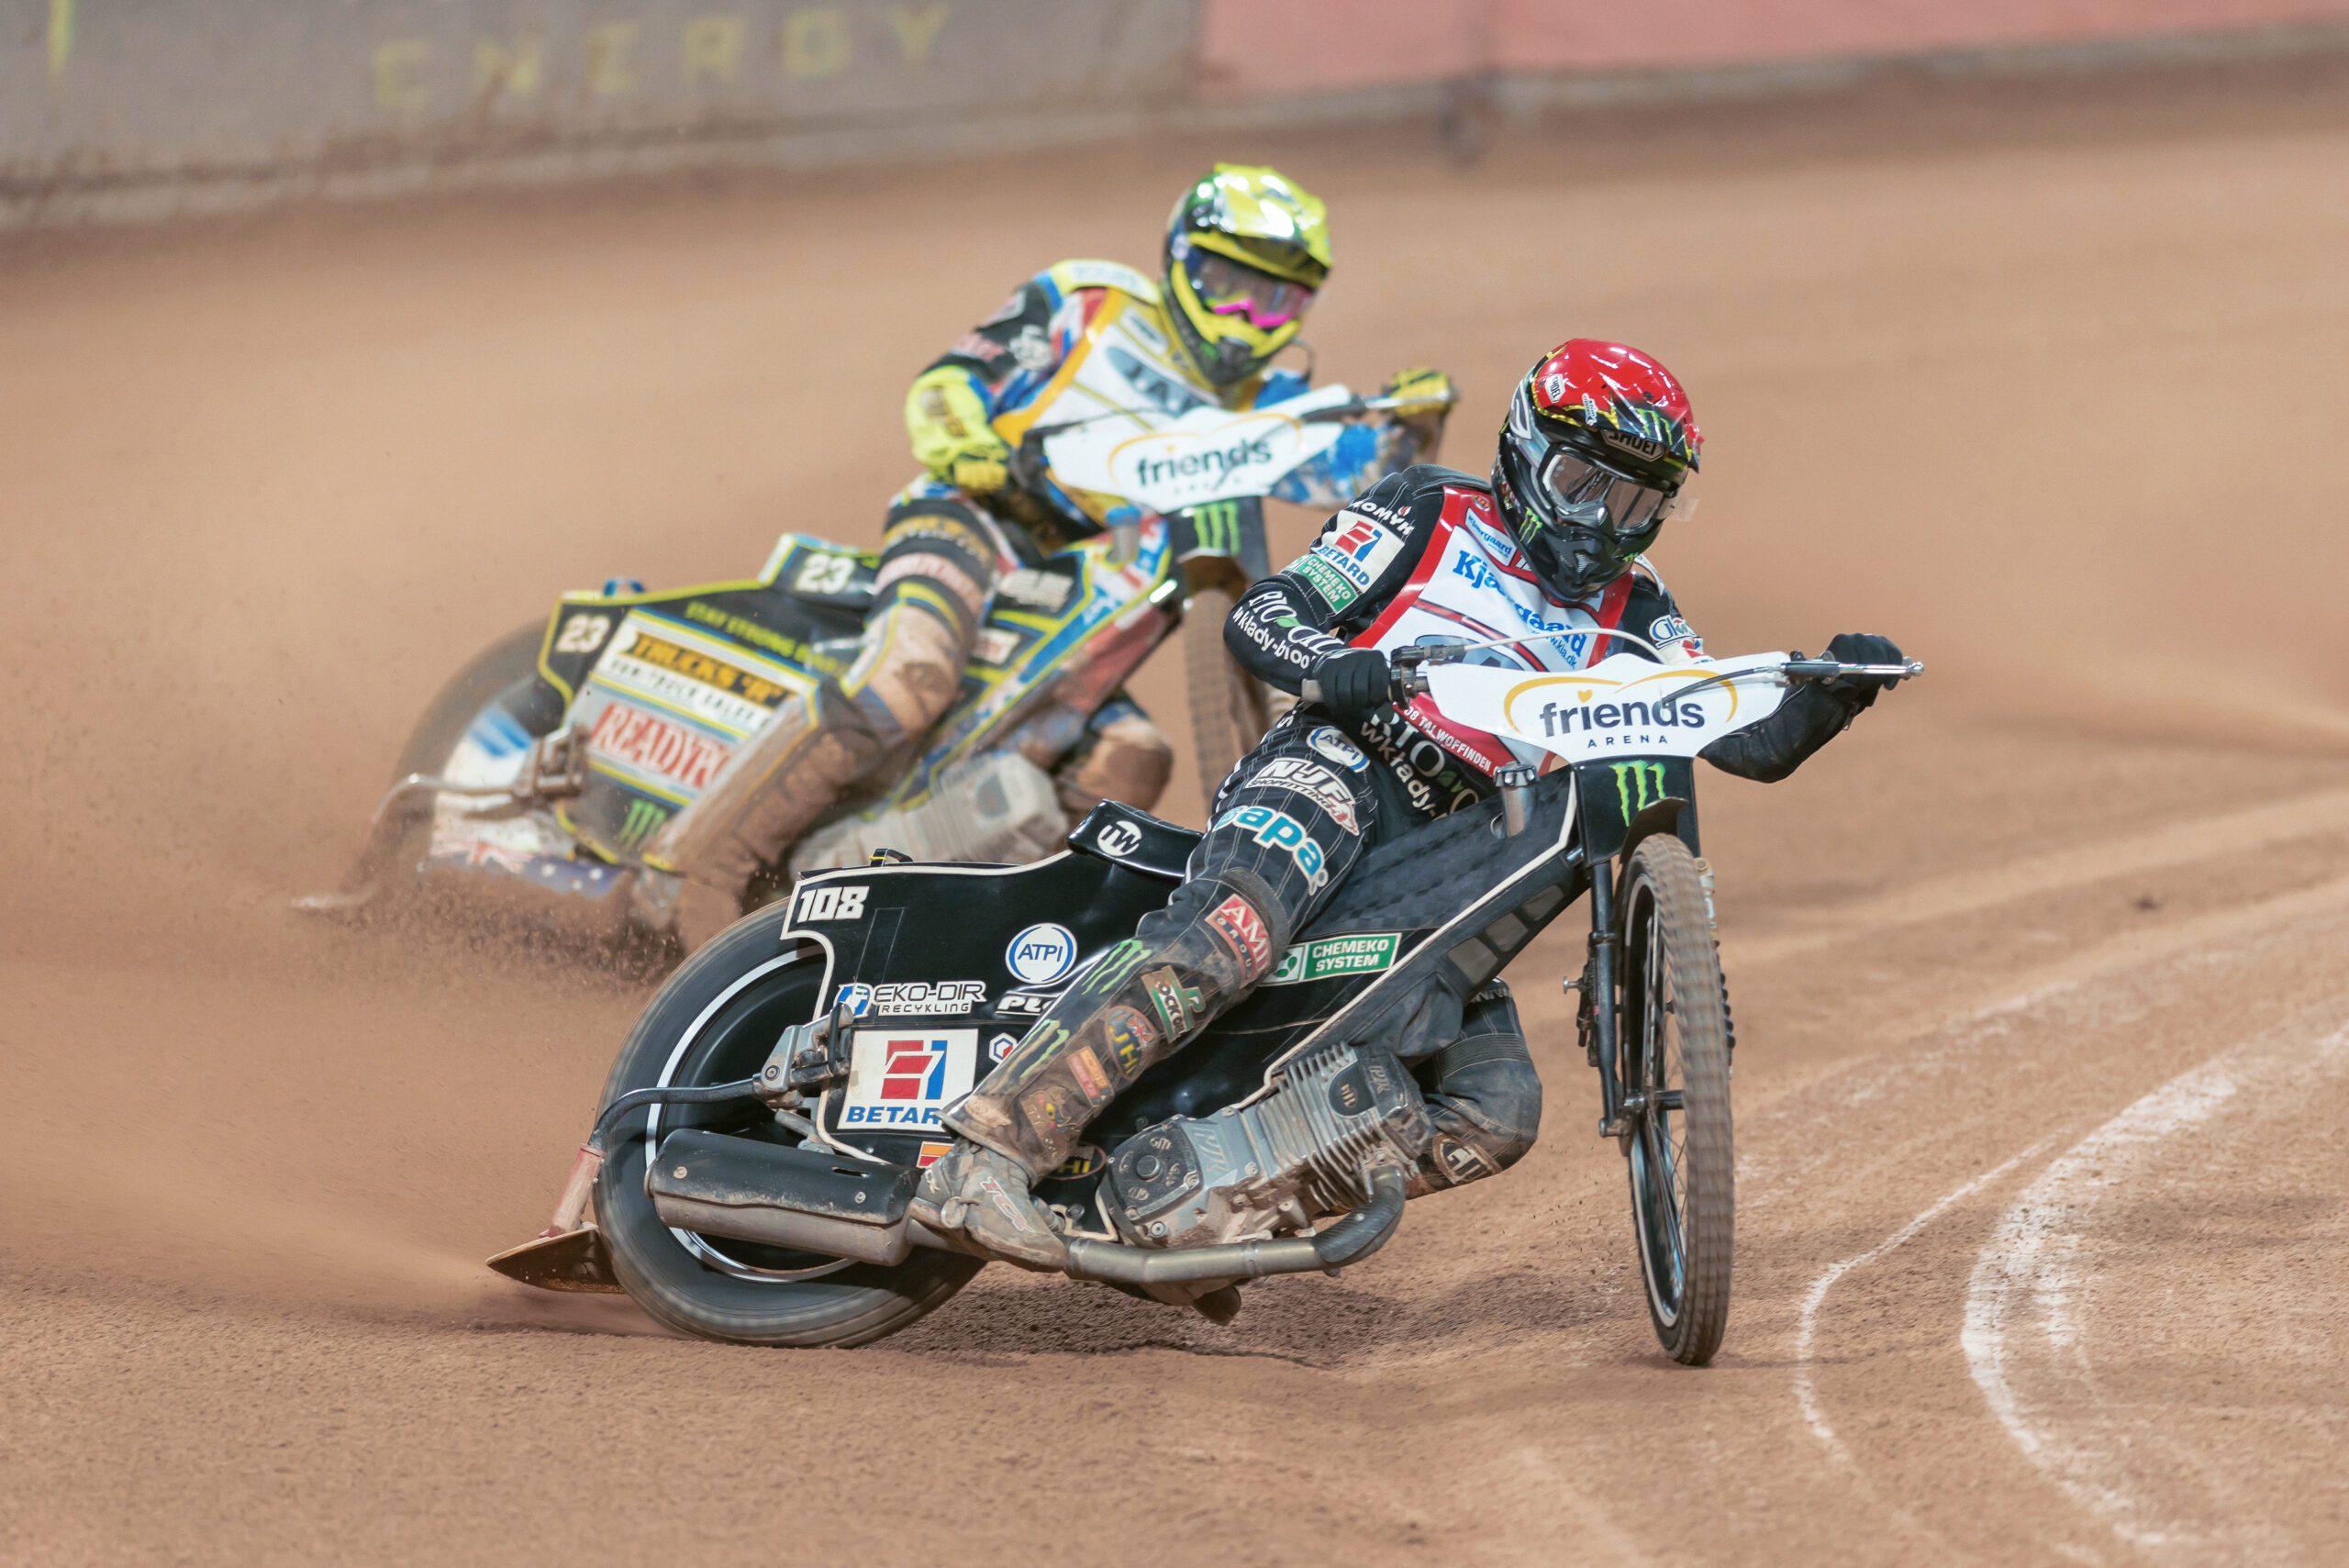 Life insurance for speedway riders